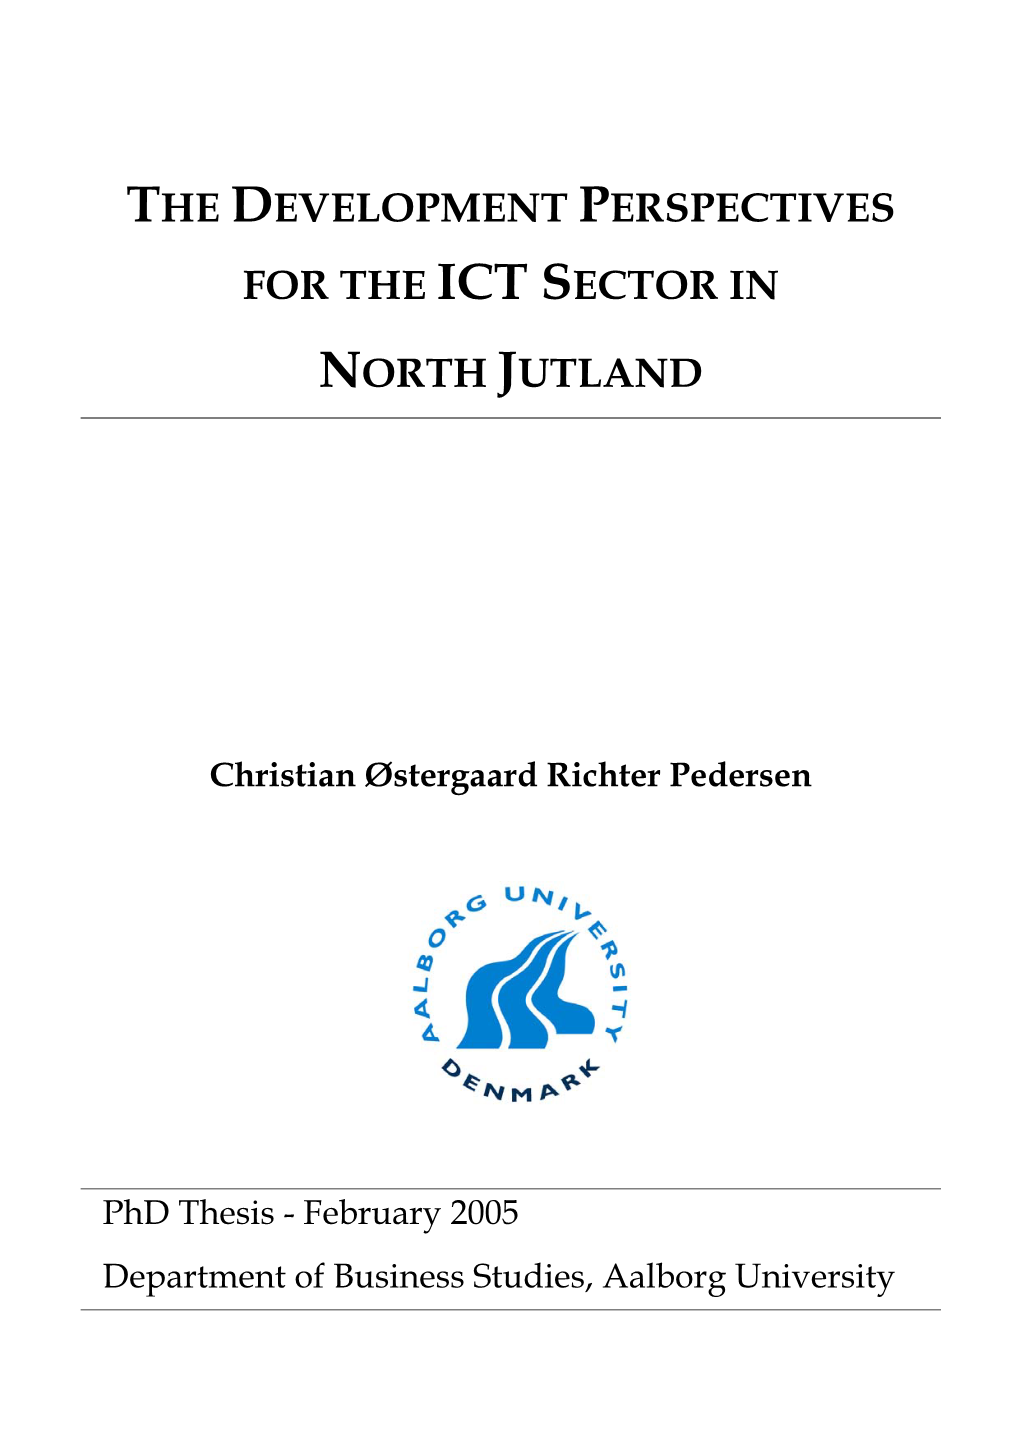 For the Ict Sector in North Jutland